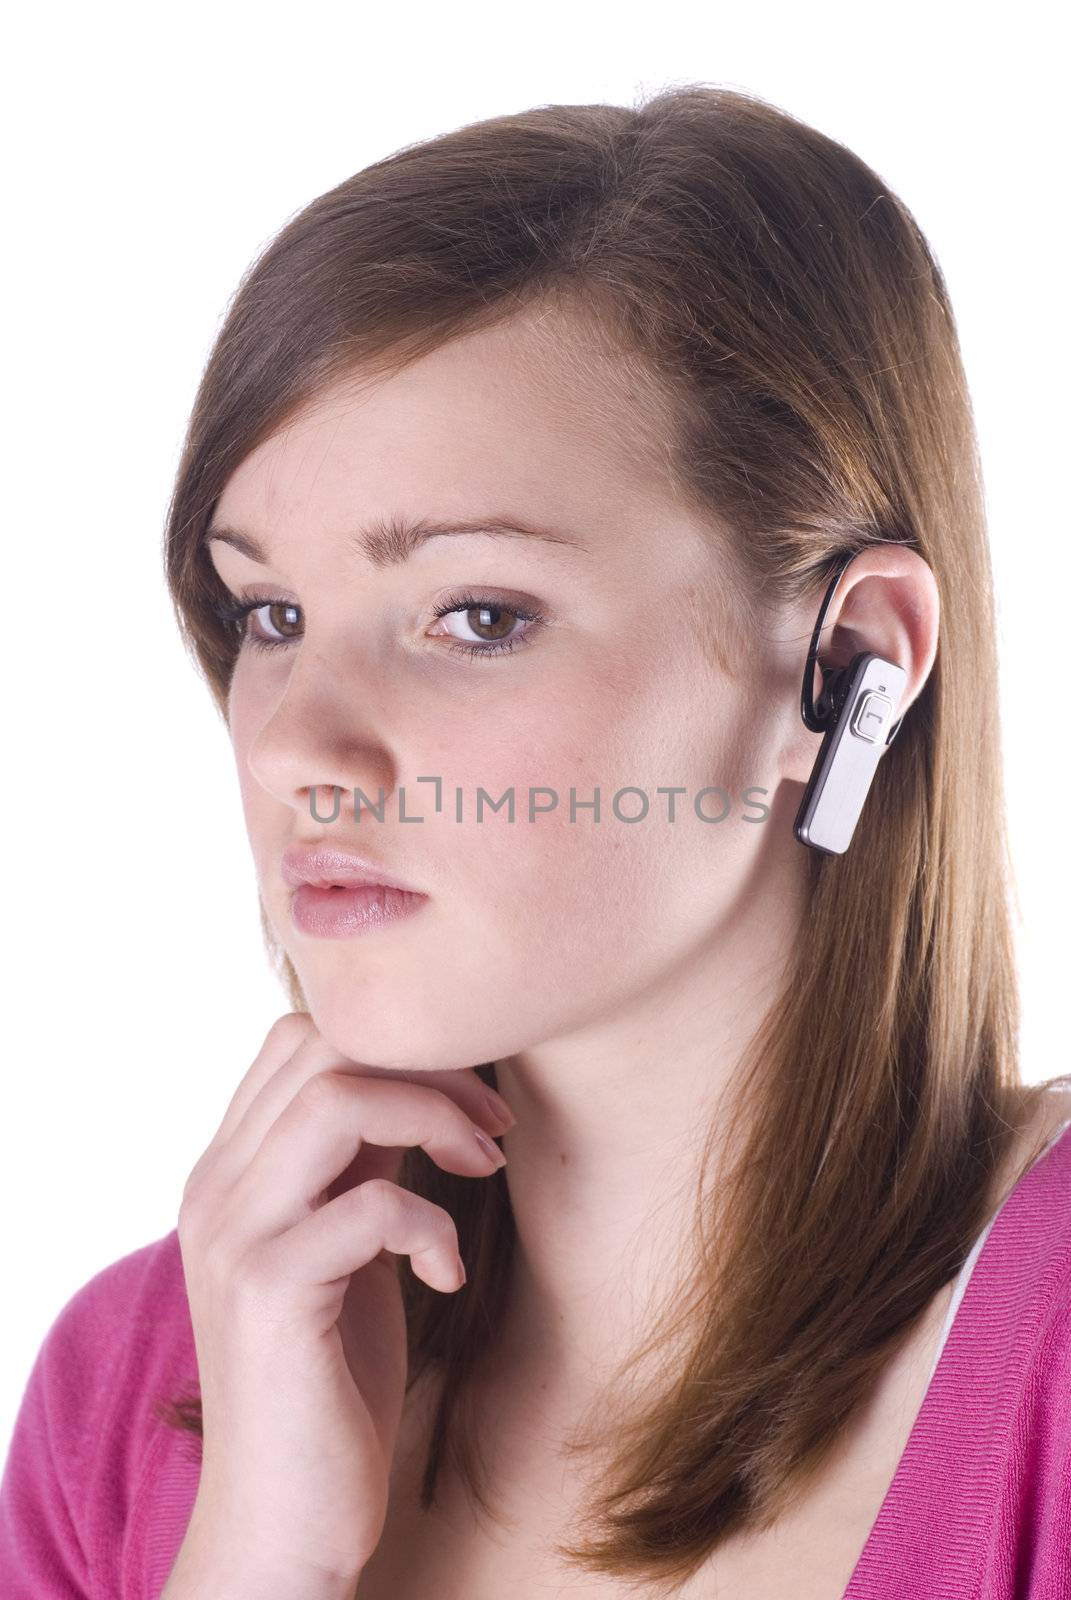 Teenage girl with wireless headset isolated on a white background.